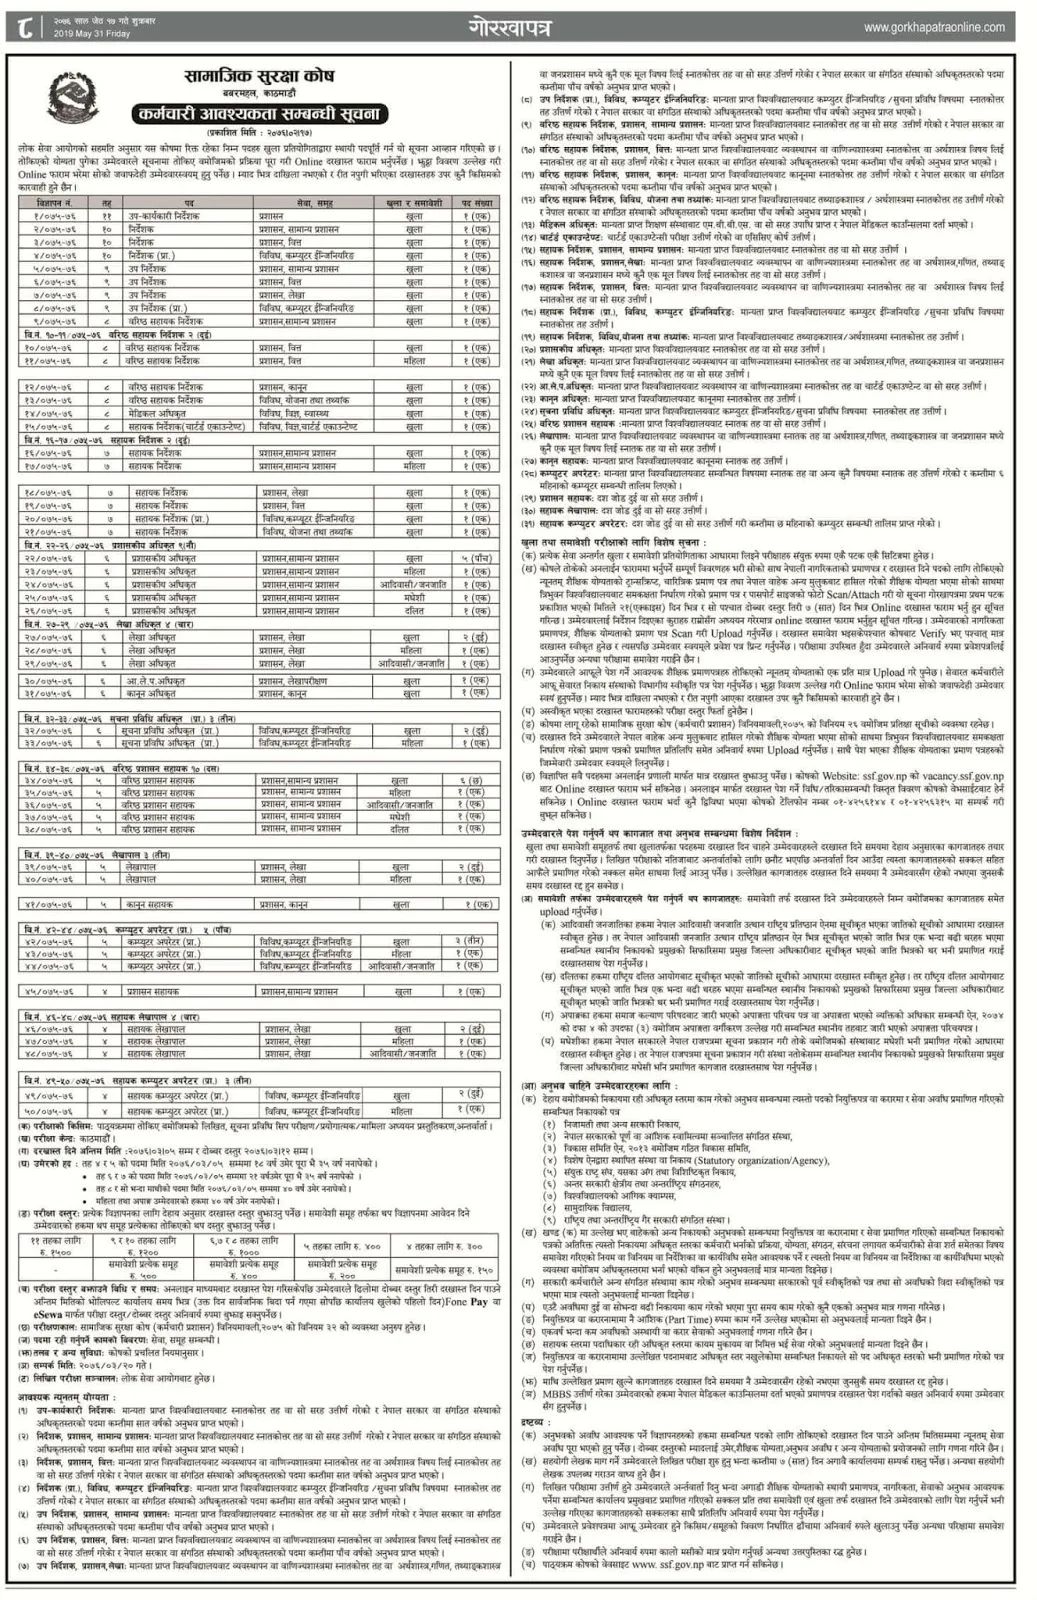 Social Security Fund Nepal Vacancies for 67 Positions.